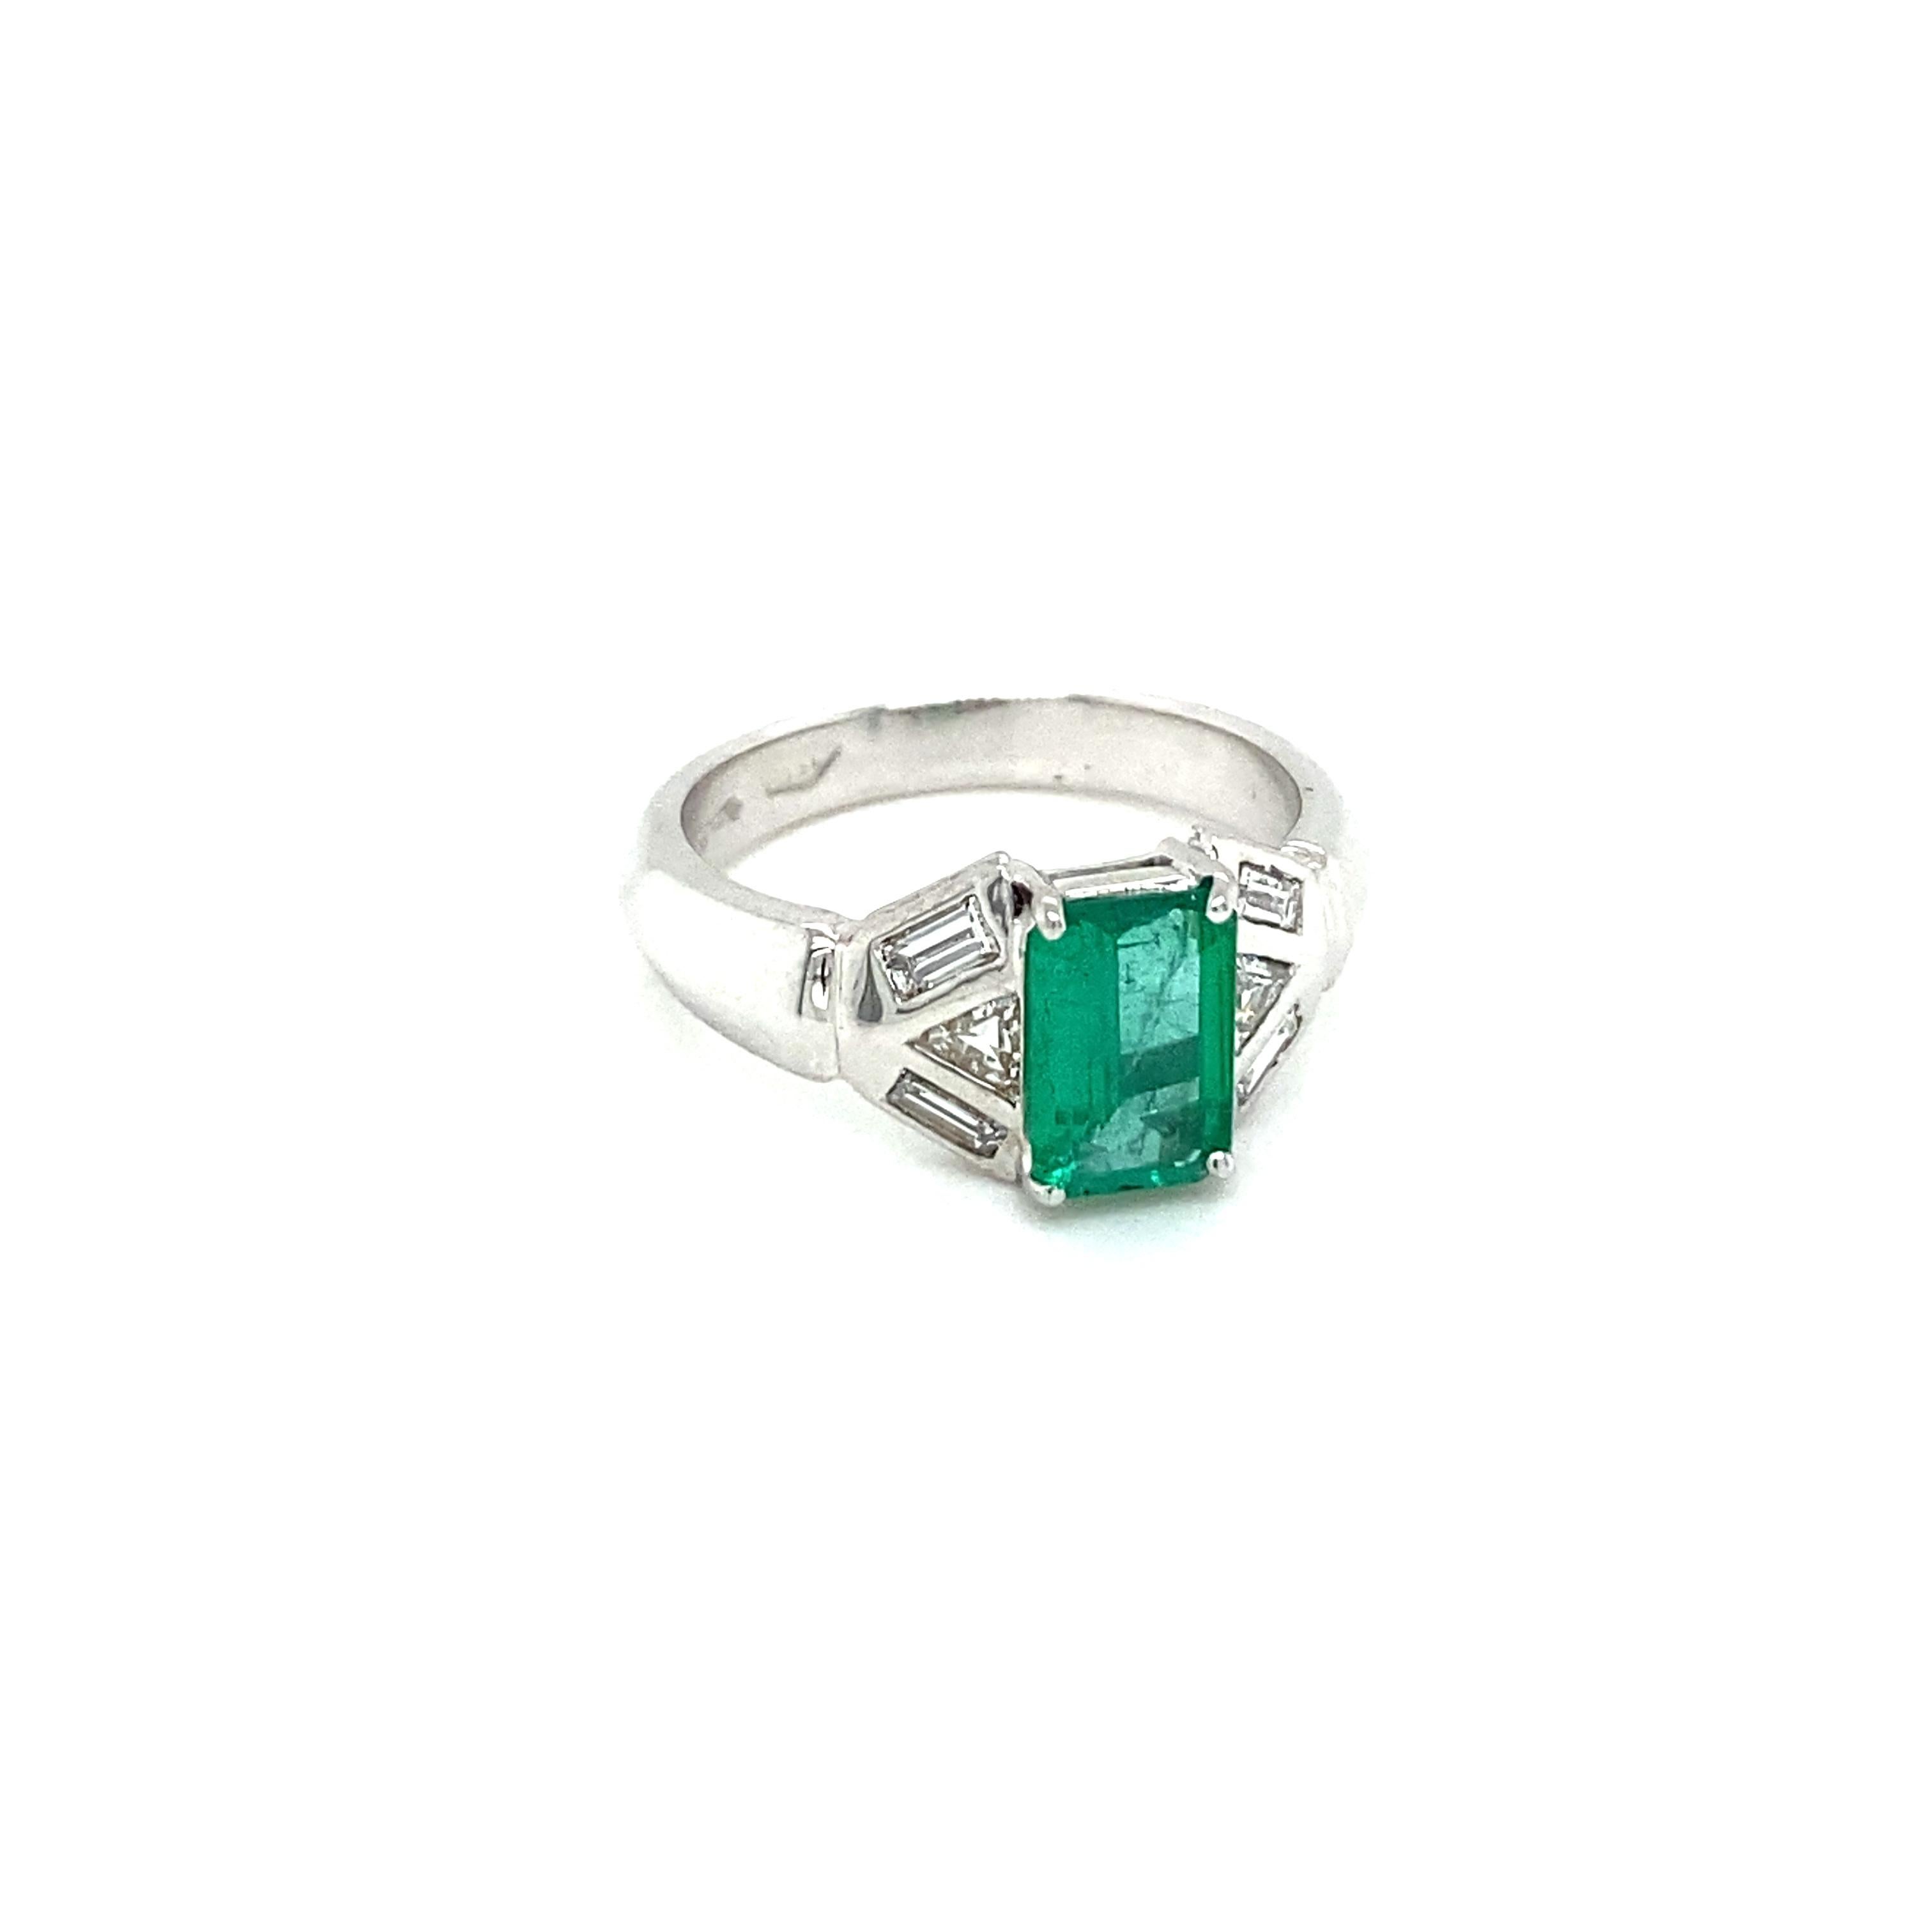 An Art Deco Emerald and diamond ring handcrafted in 18k gold. The ring is set with one beautiful emerald cut 1.04 ct Natural Emerald framed by six baguette cut diamonds and two Trillion diamonds. Circa 1930

CONDITION: Pre-Owned - Excellent 
METAL: